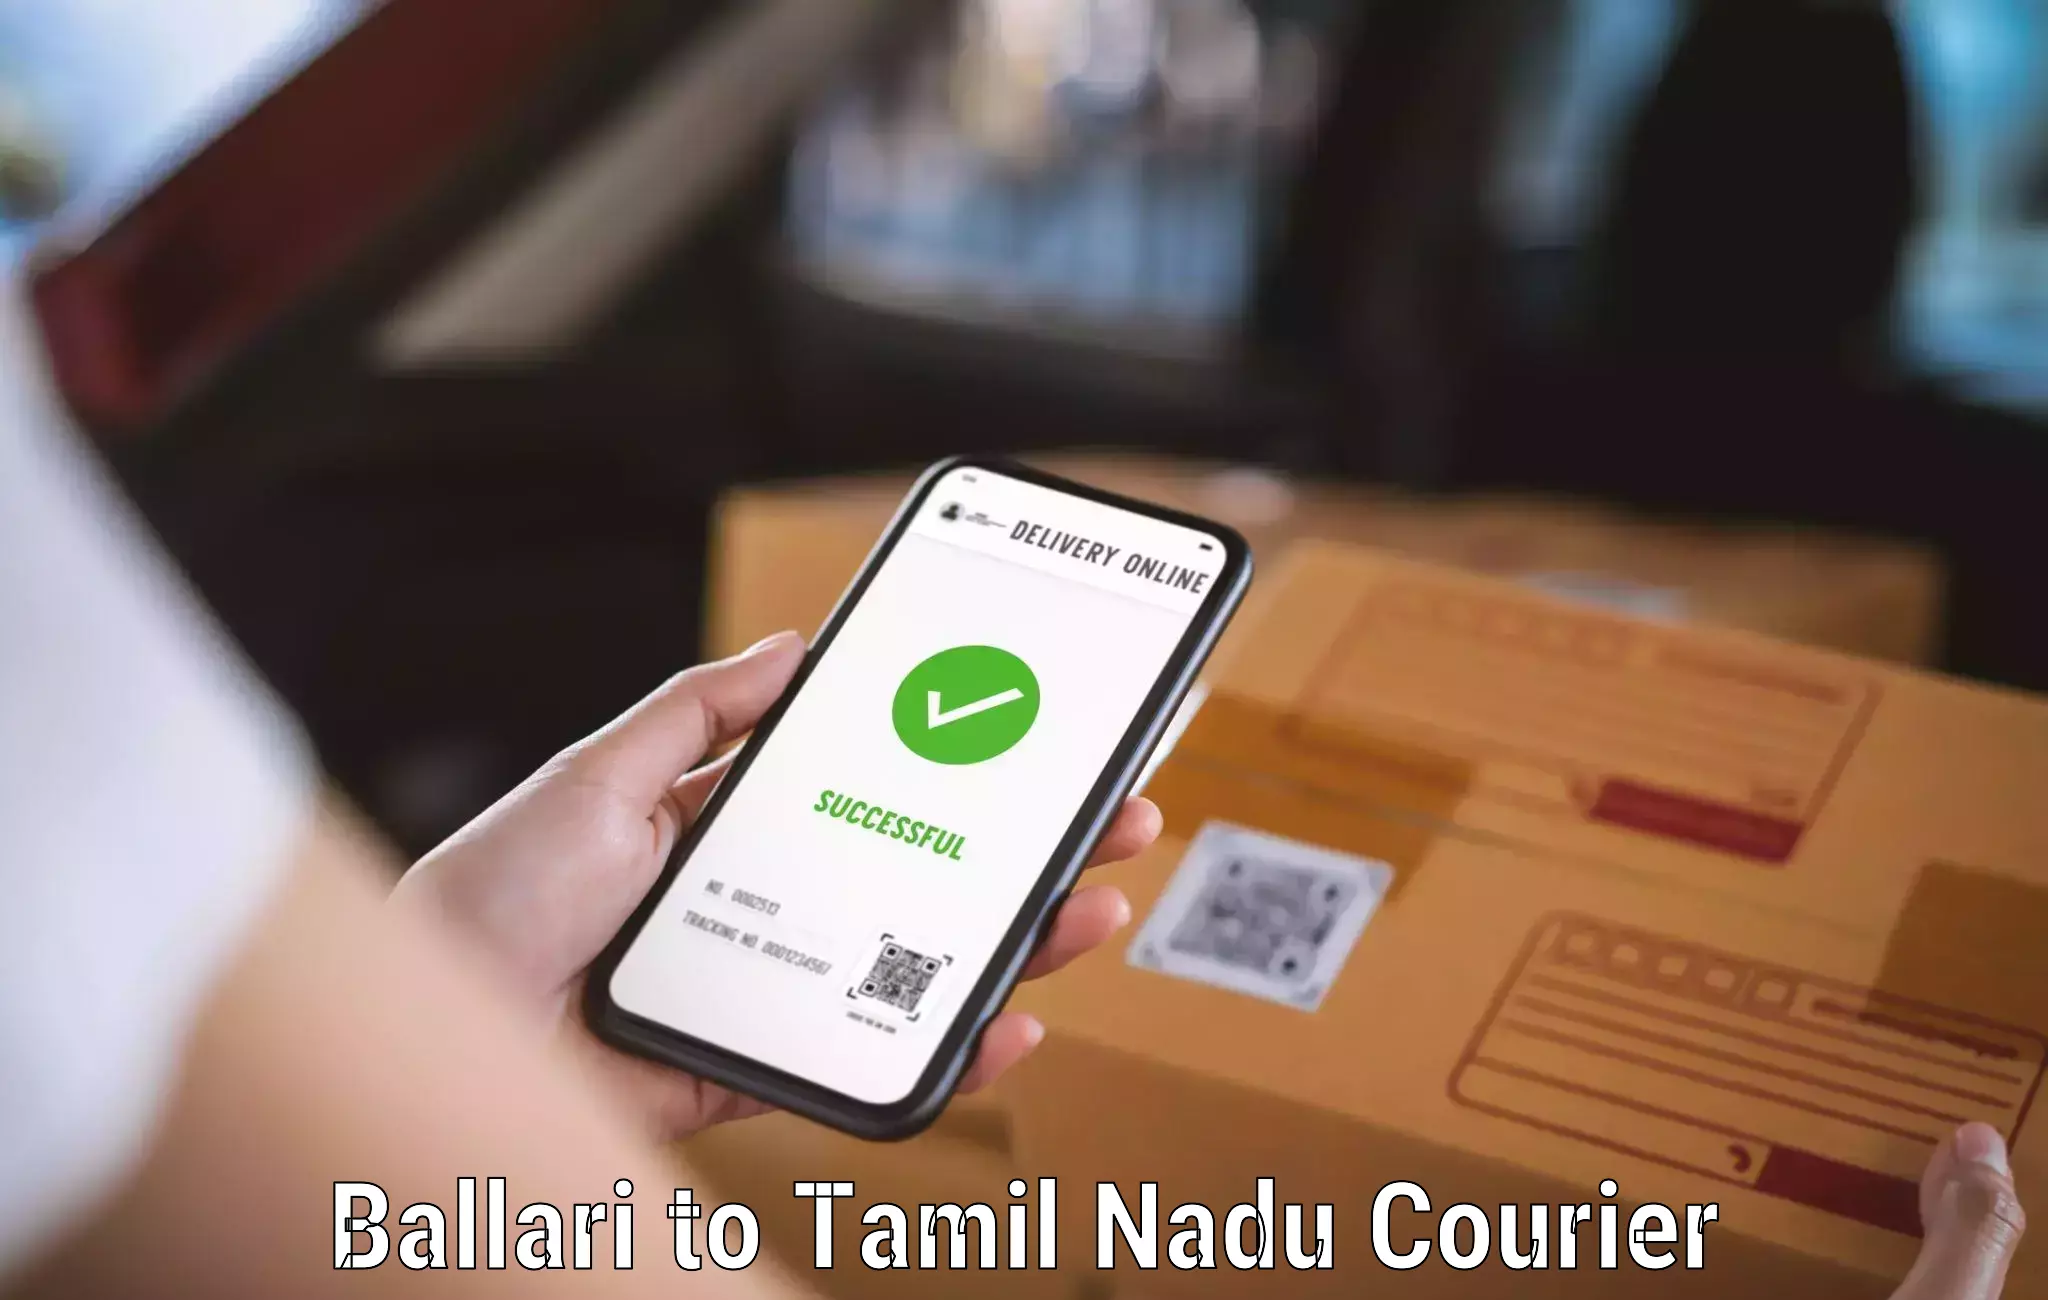 State-of-the-art courier technology Ballari to Shanmugha Arts Science Technology and Research Academy Thanjavur